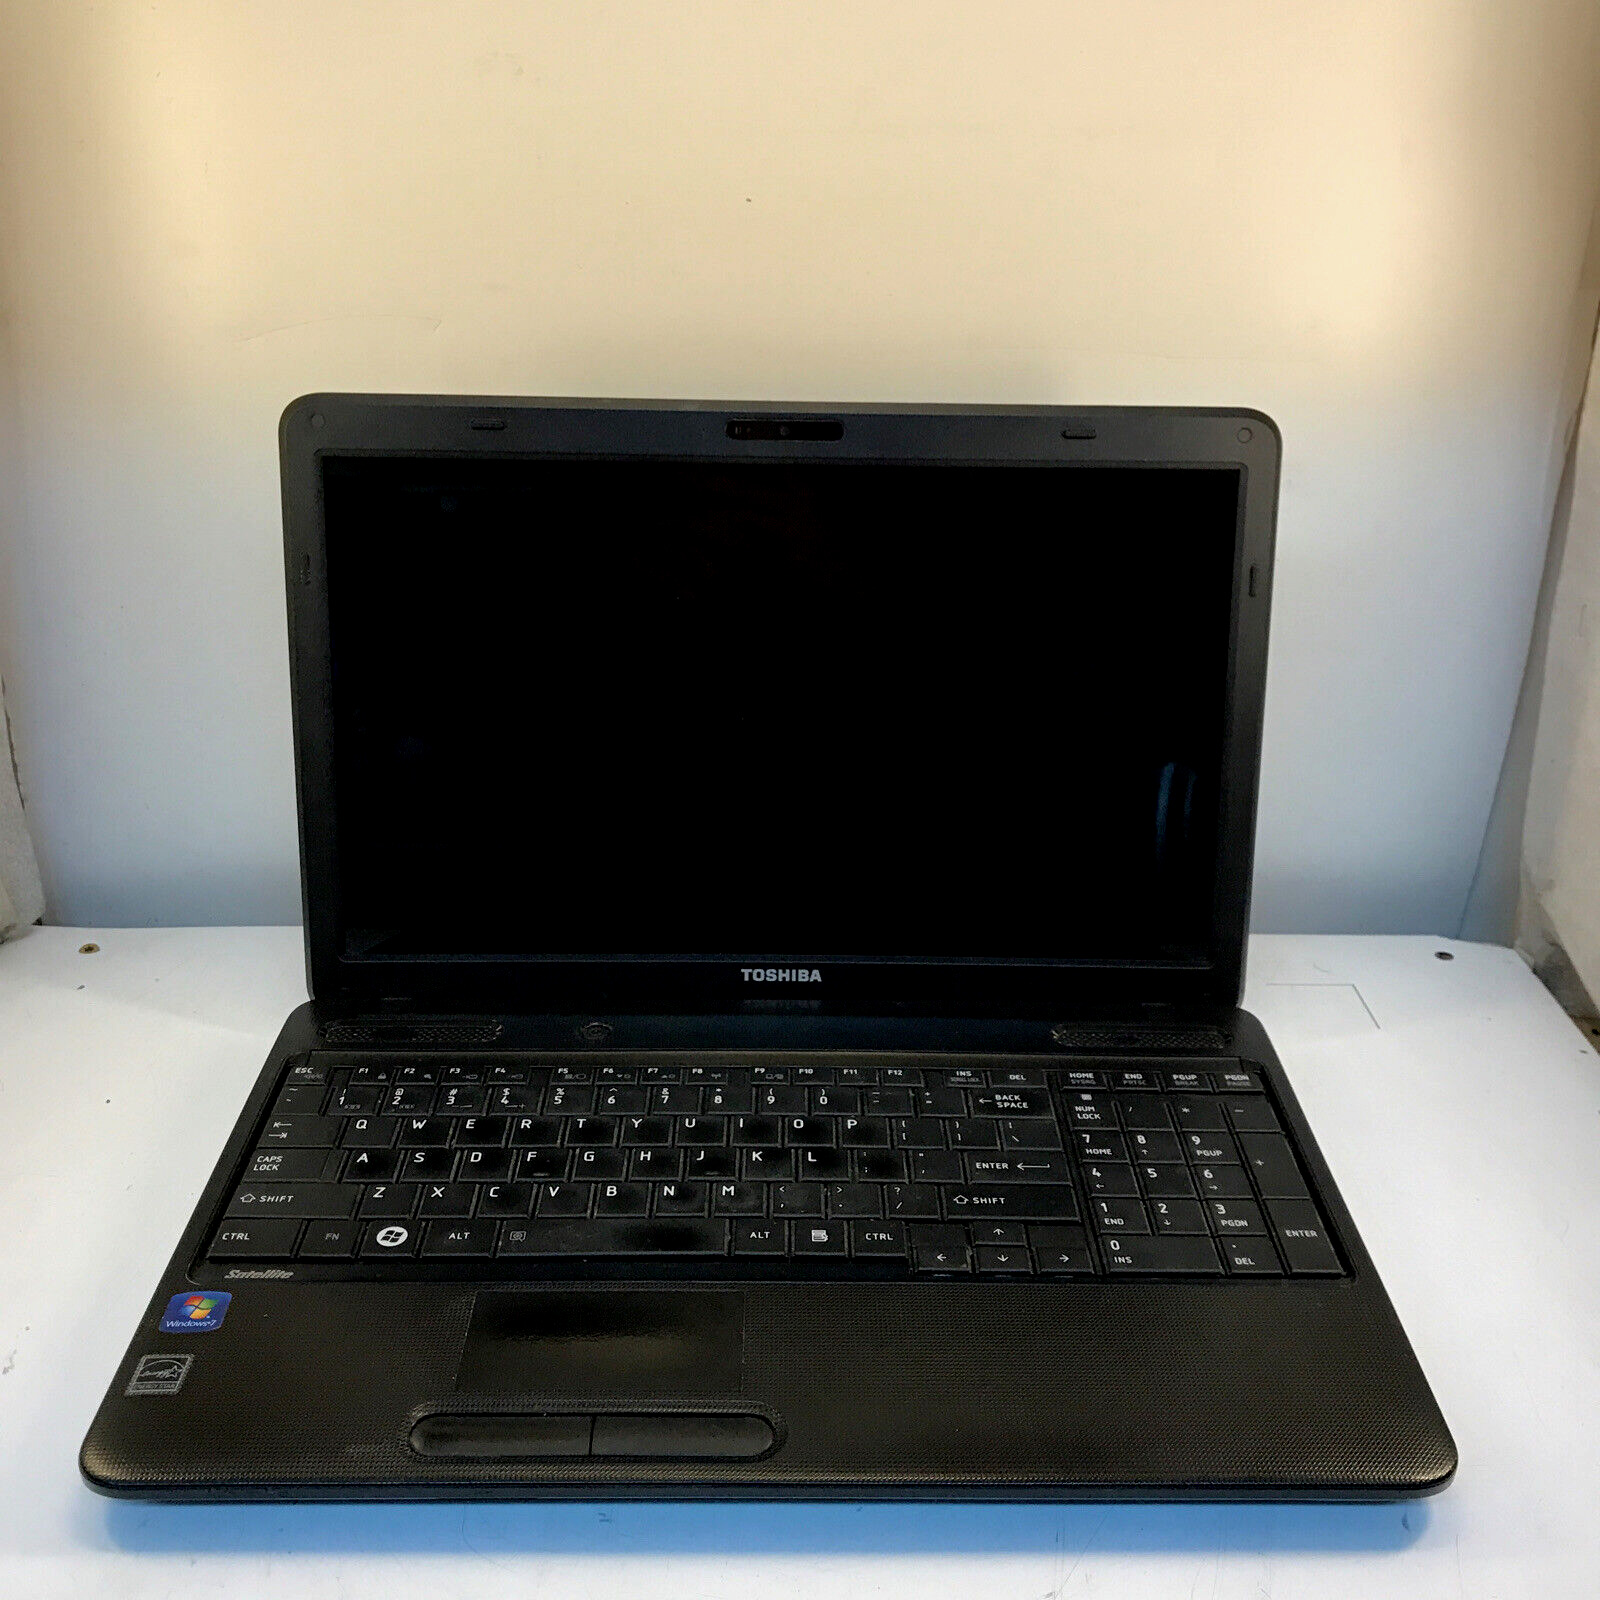 Toshiba Satellite C650D AMD E-300 1.30GHZ 4GB Ram No HDD Boot to BIOS